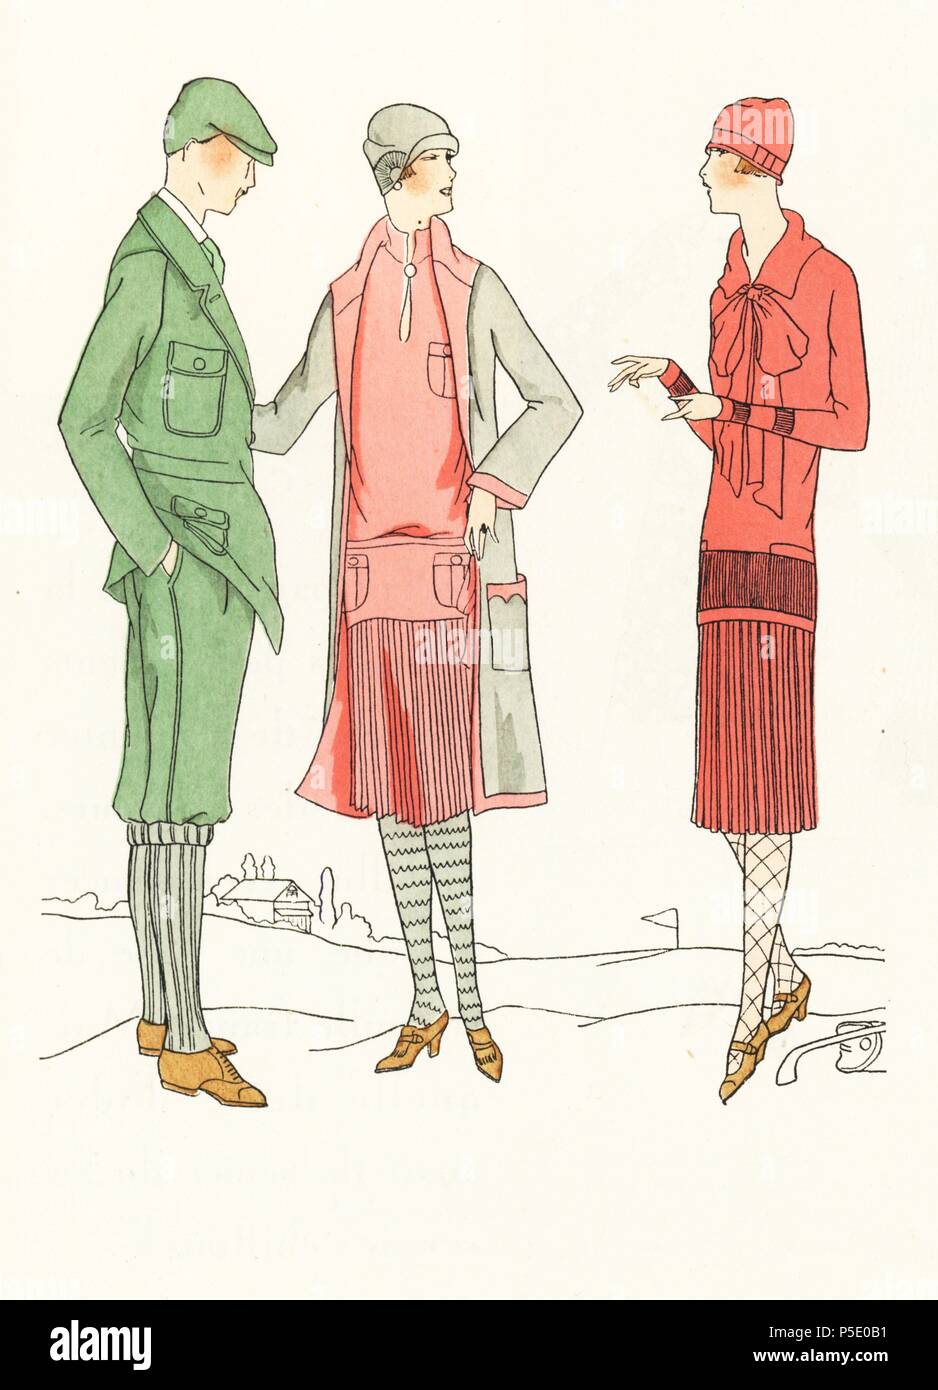 Golf fashions from 1926. Man in green jacket and plus fours, woman in pink suit of crepe de chine with grey coat, and woman in sports skirt and sweater. Lithograph with pochoir (stencil) handcolour from the luxury French fashion magazine 'Art, Gout, Beaute,' 1926. Stock Photo